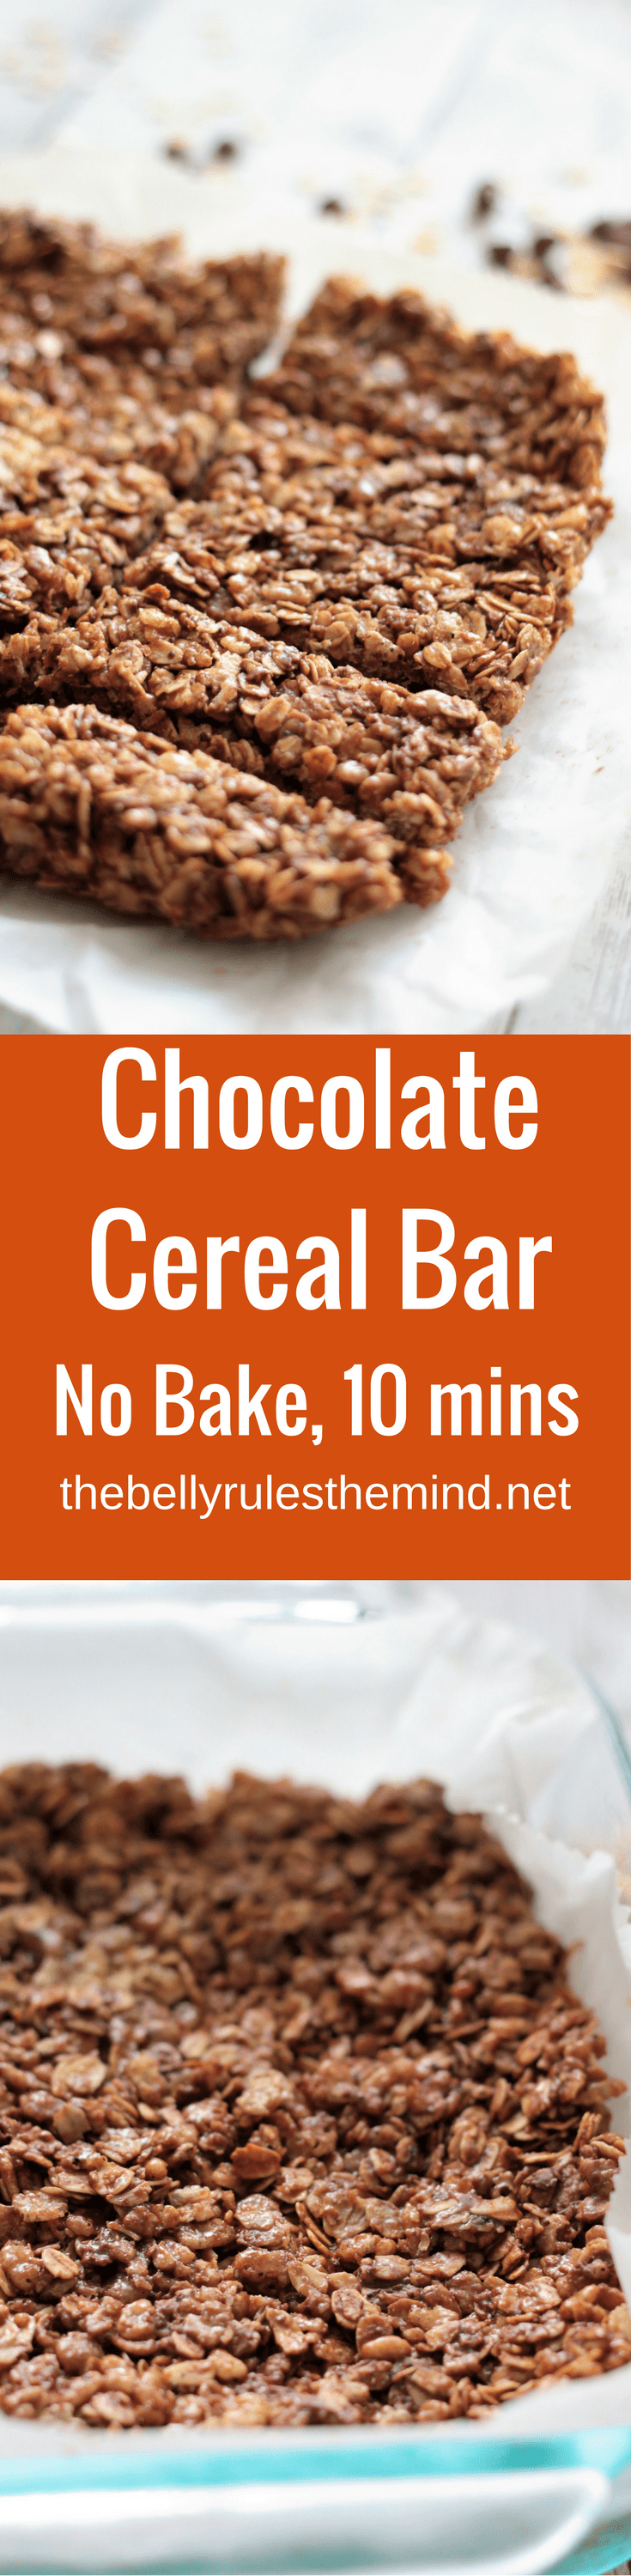 Homemade cereal bars that are quick (no-bake), easy and nutritious. Ready in just 10 minutes, they make a great go-to snack option too. Once you are hooked onto these, you will stop buying cereal bars from the store |www.thebellyrulesthemind.net @bellyrulesdmind